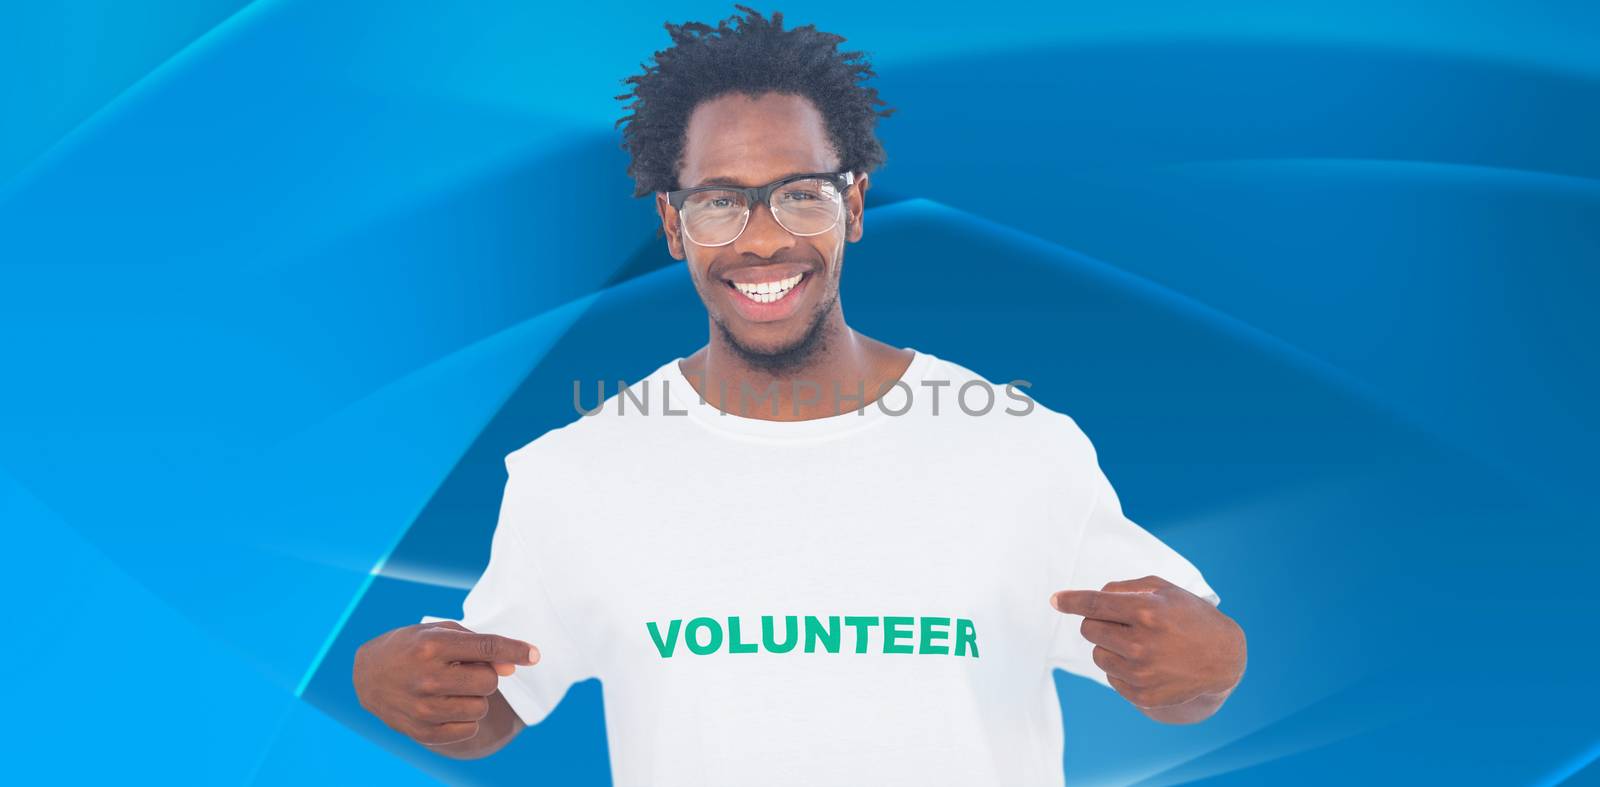 Handsome man pointing to his volunteer tshirt against abstract blue design